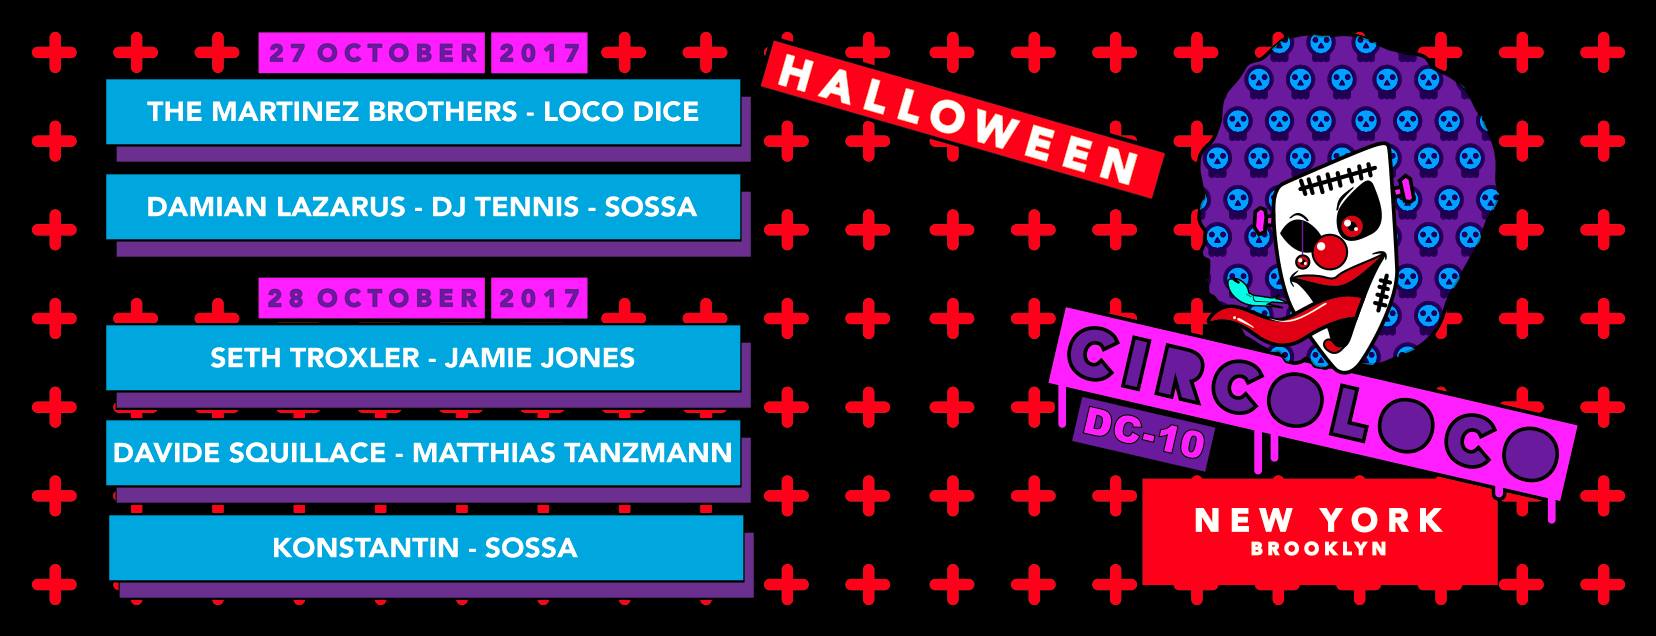 Circoloco lands in New York for its Halloween Edition Electronic Groove